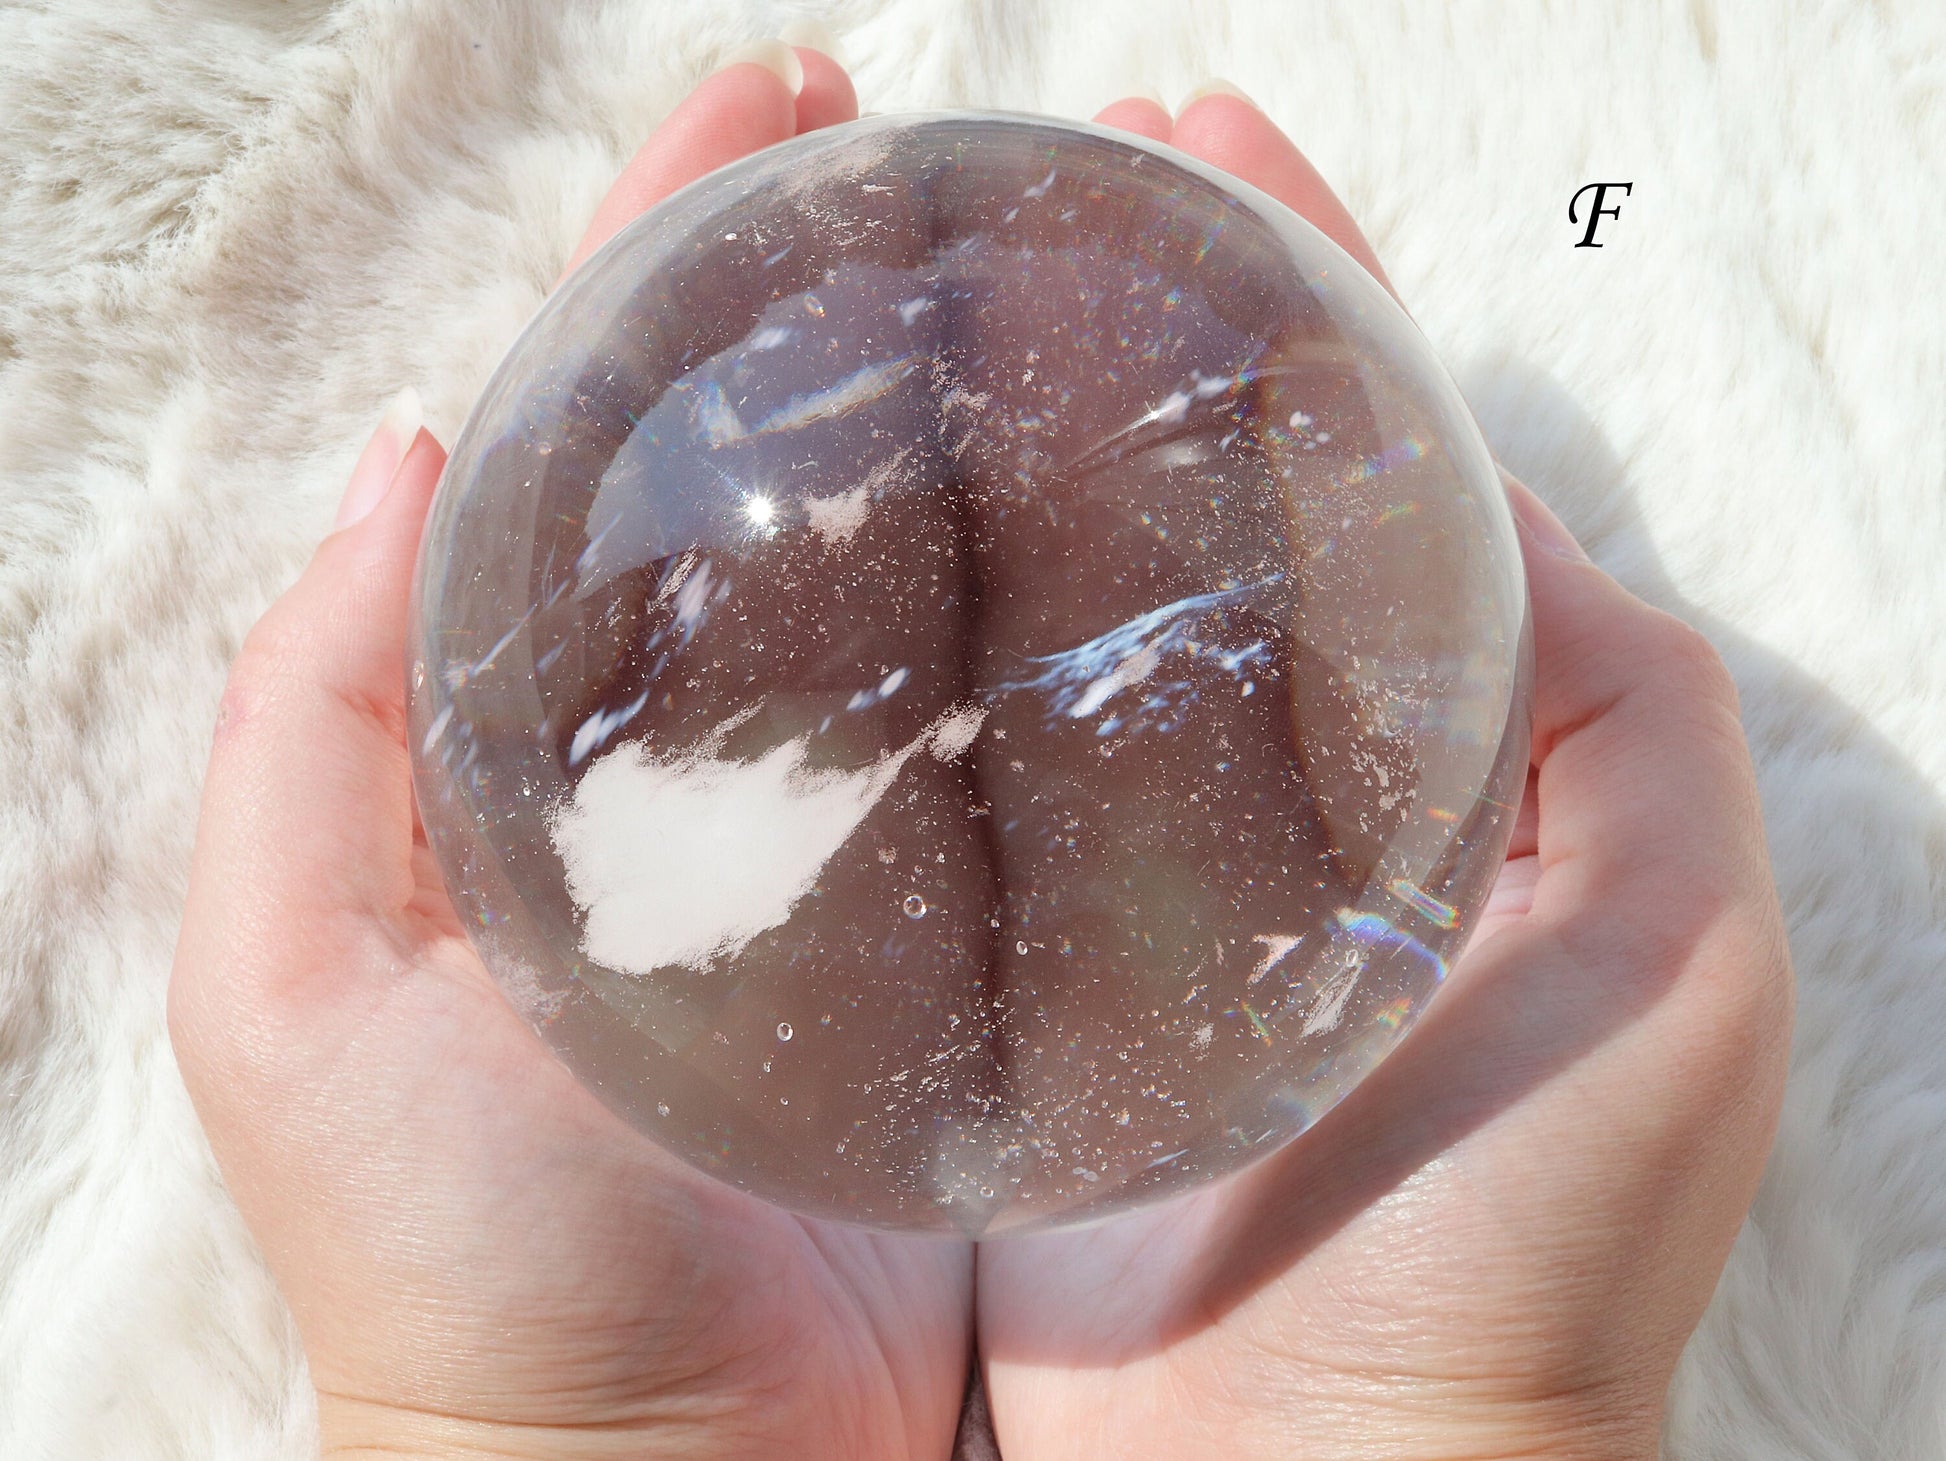 Smelted Quartz Spheres, Ethically Sourced Crystals, Healing and Intuition - PICK YOUR OWN